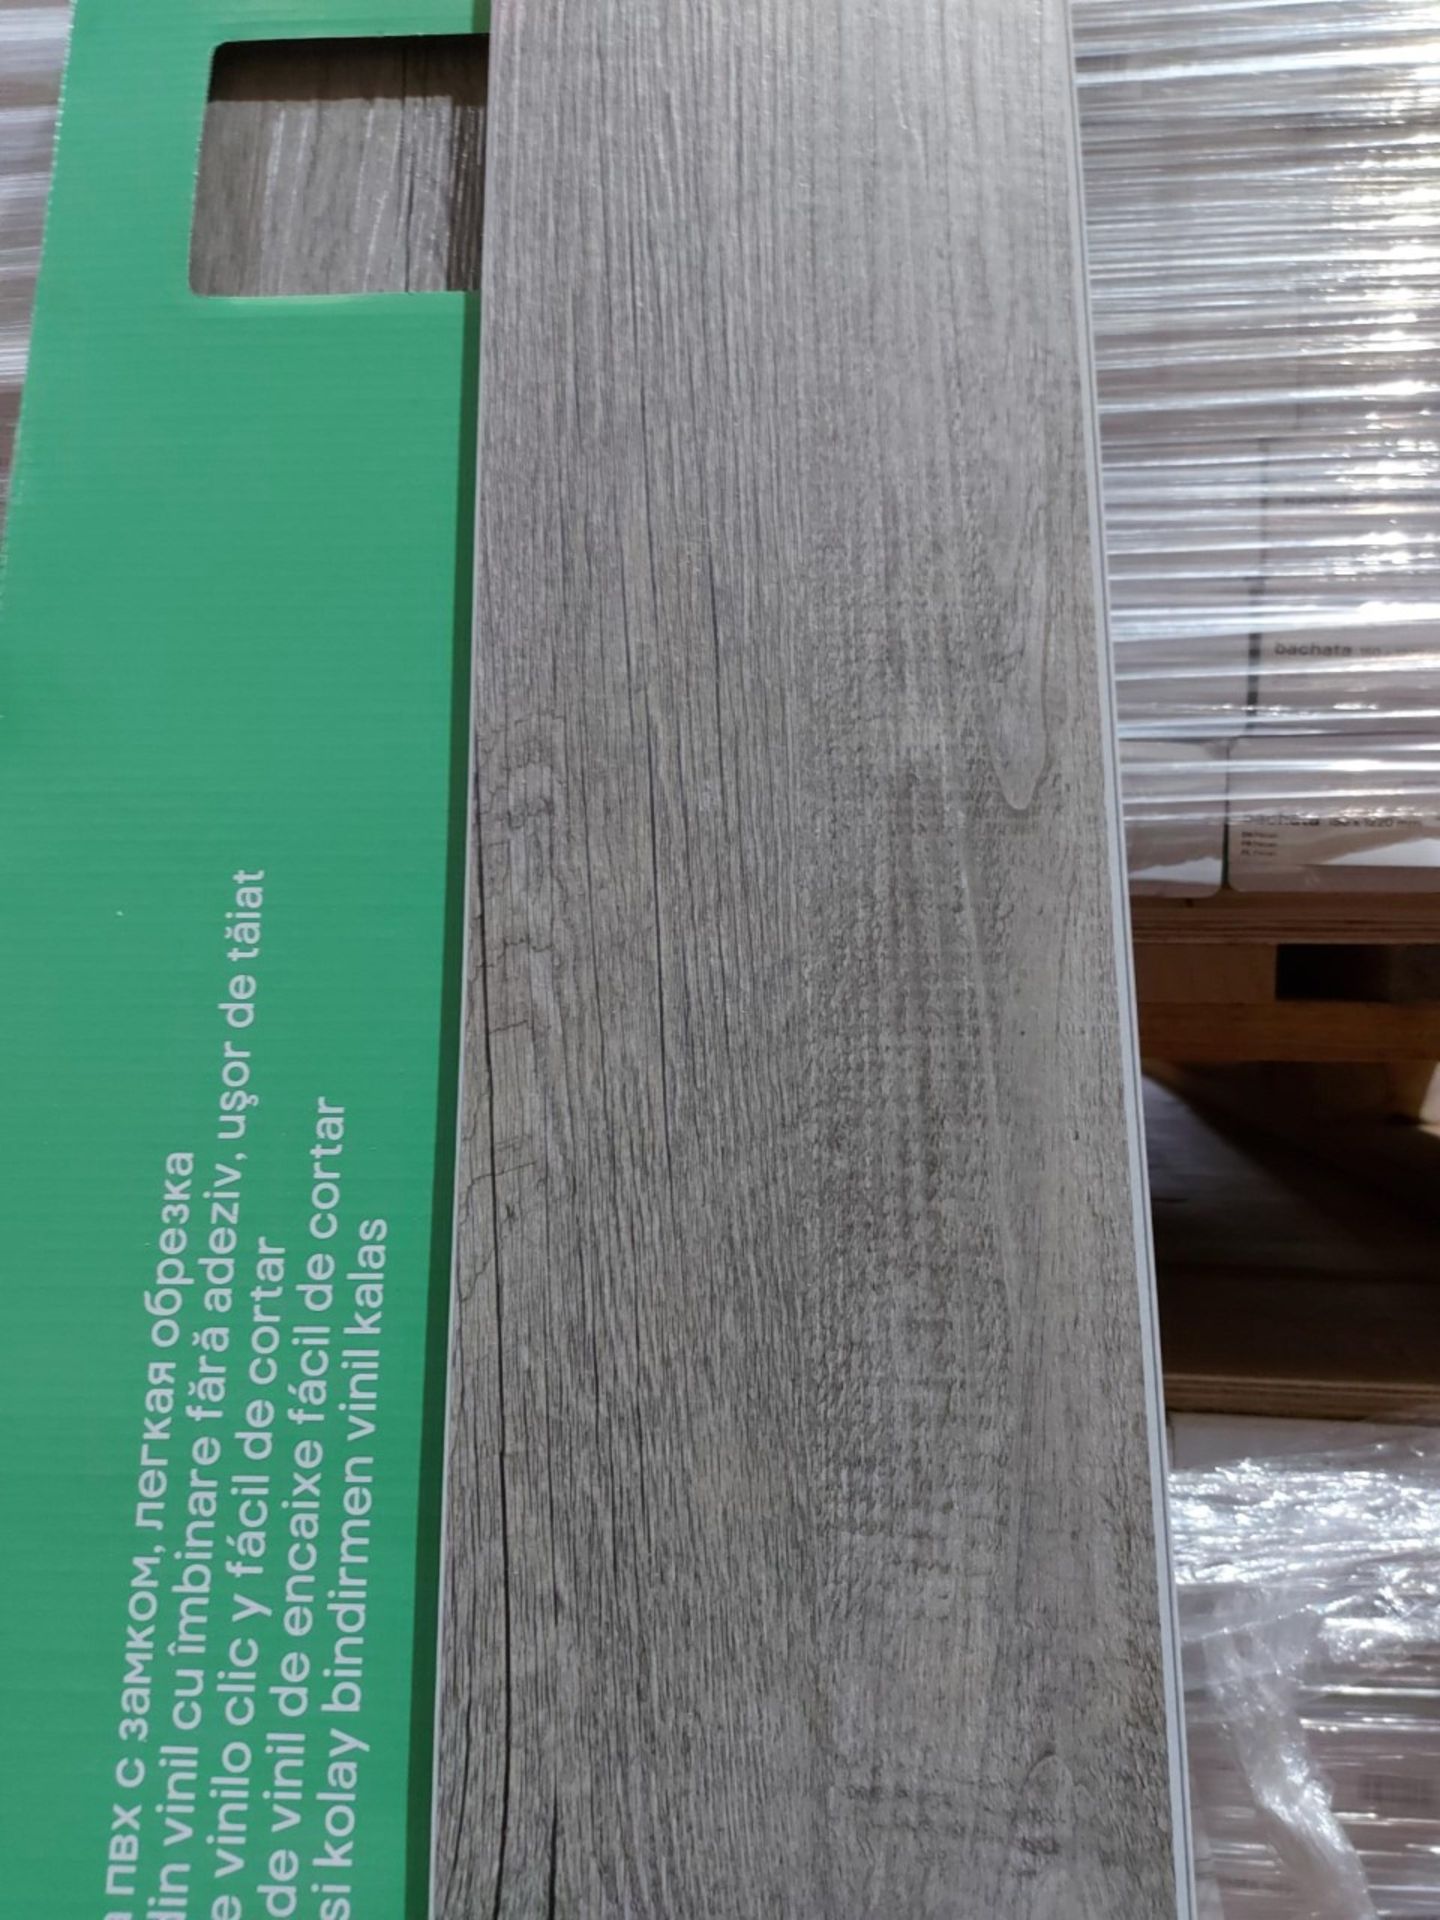 PALLET TO CONTAIN 138.24m2 OF BACHETA LUXURY VINYL CLICK PLANK FLOORING. PECAN. EASY TO CUT. 3.2MM